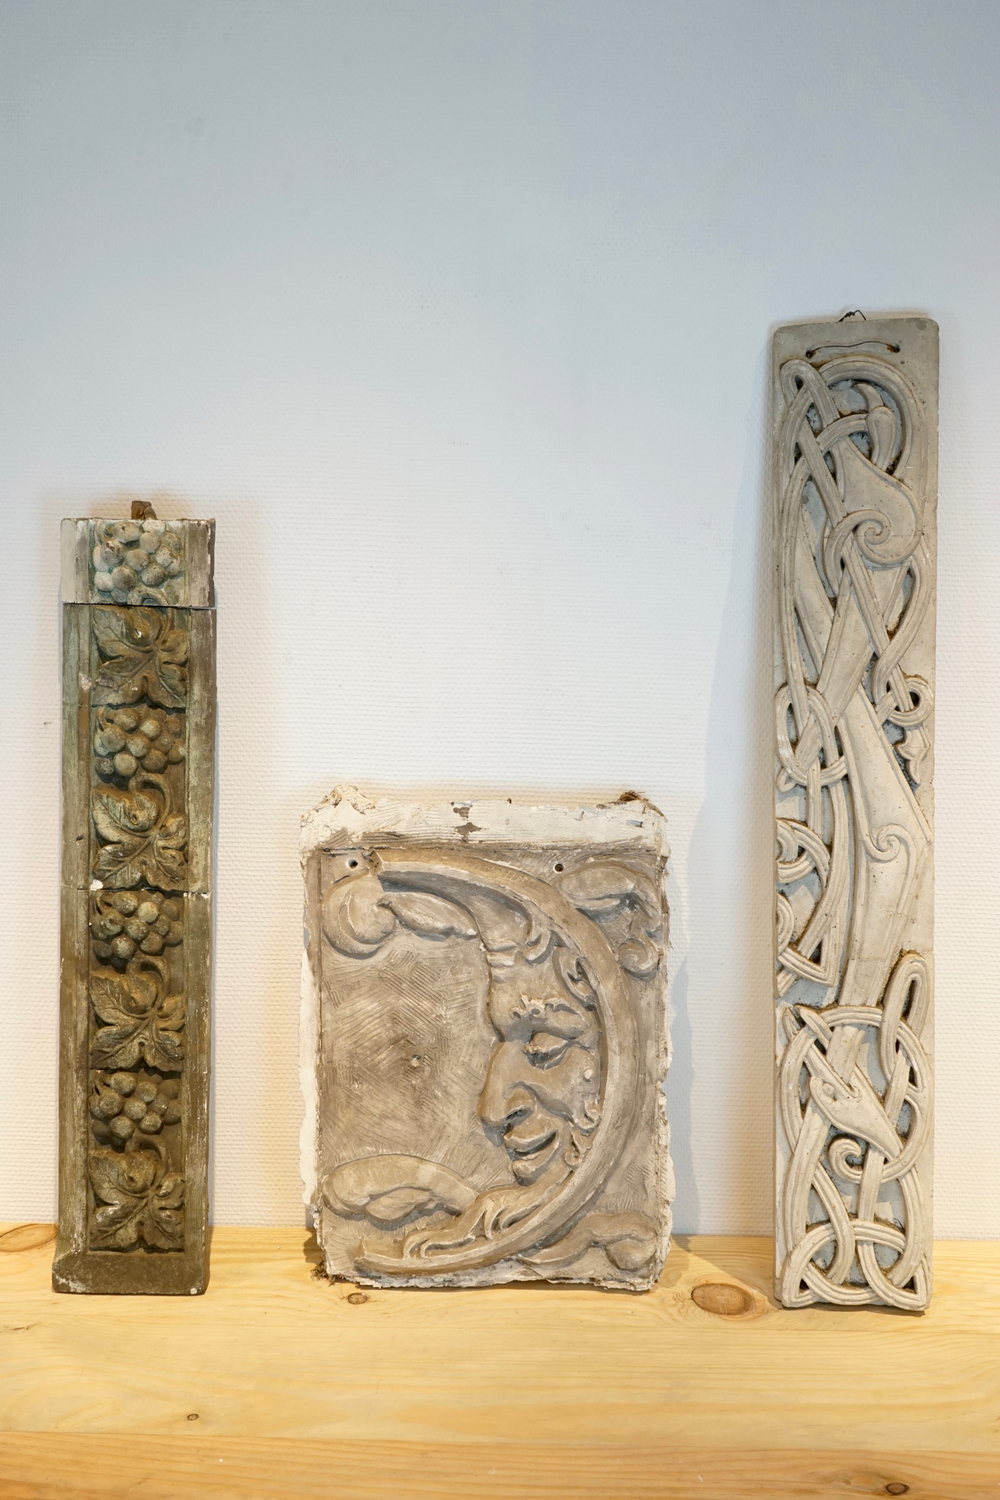 Two ornamental plaster casts and one moon plaque, 19/20th C., Bruges